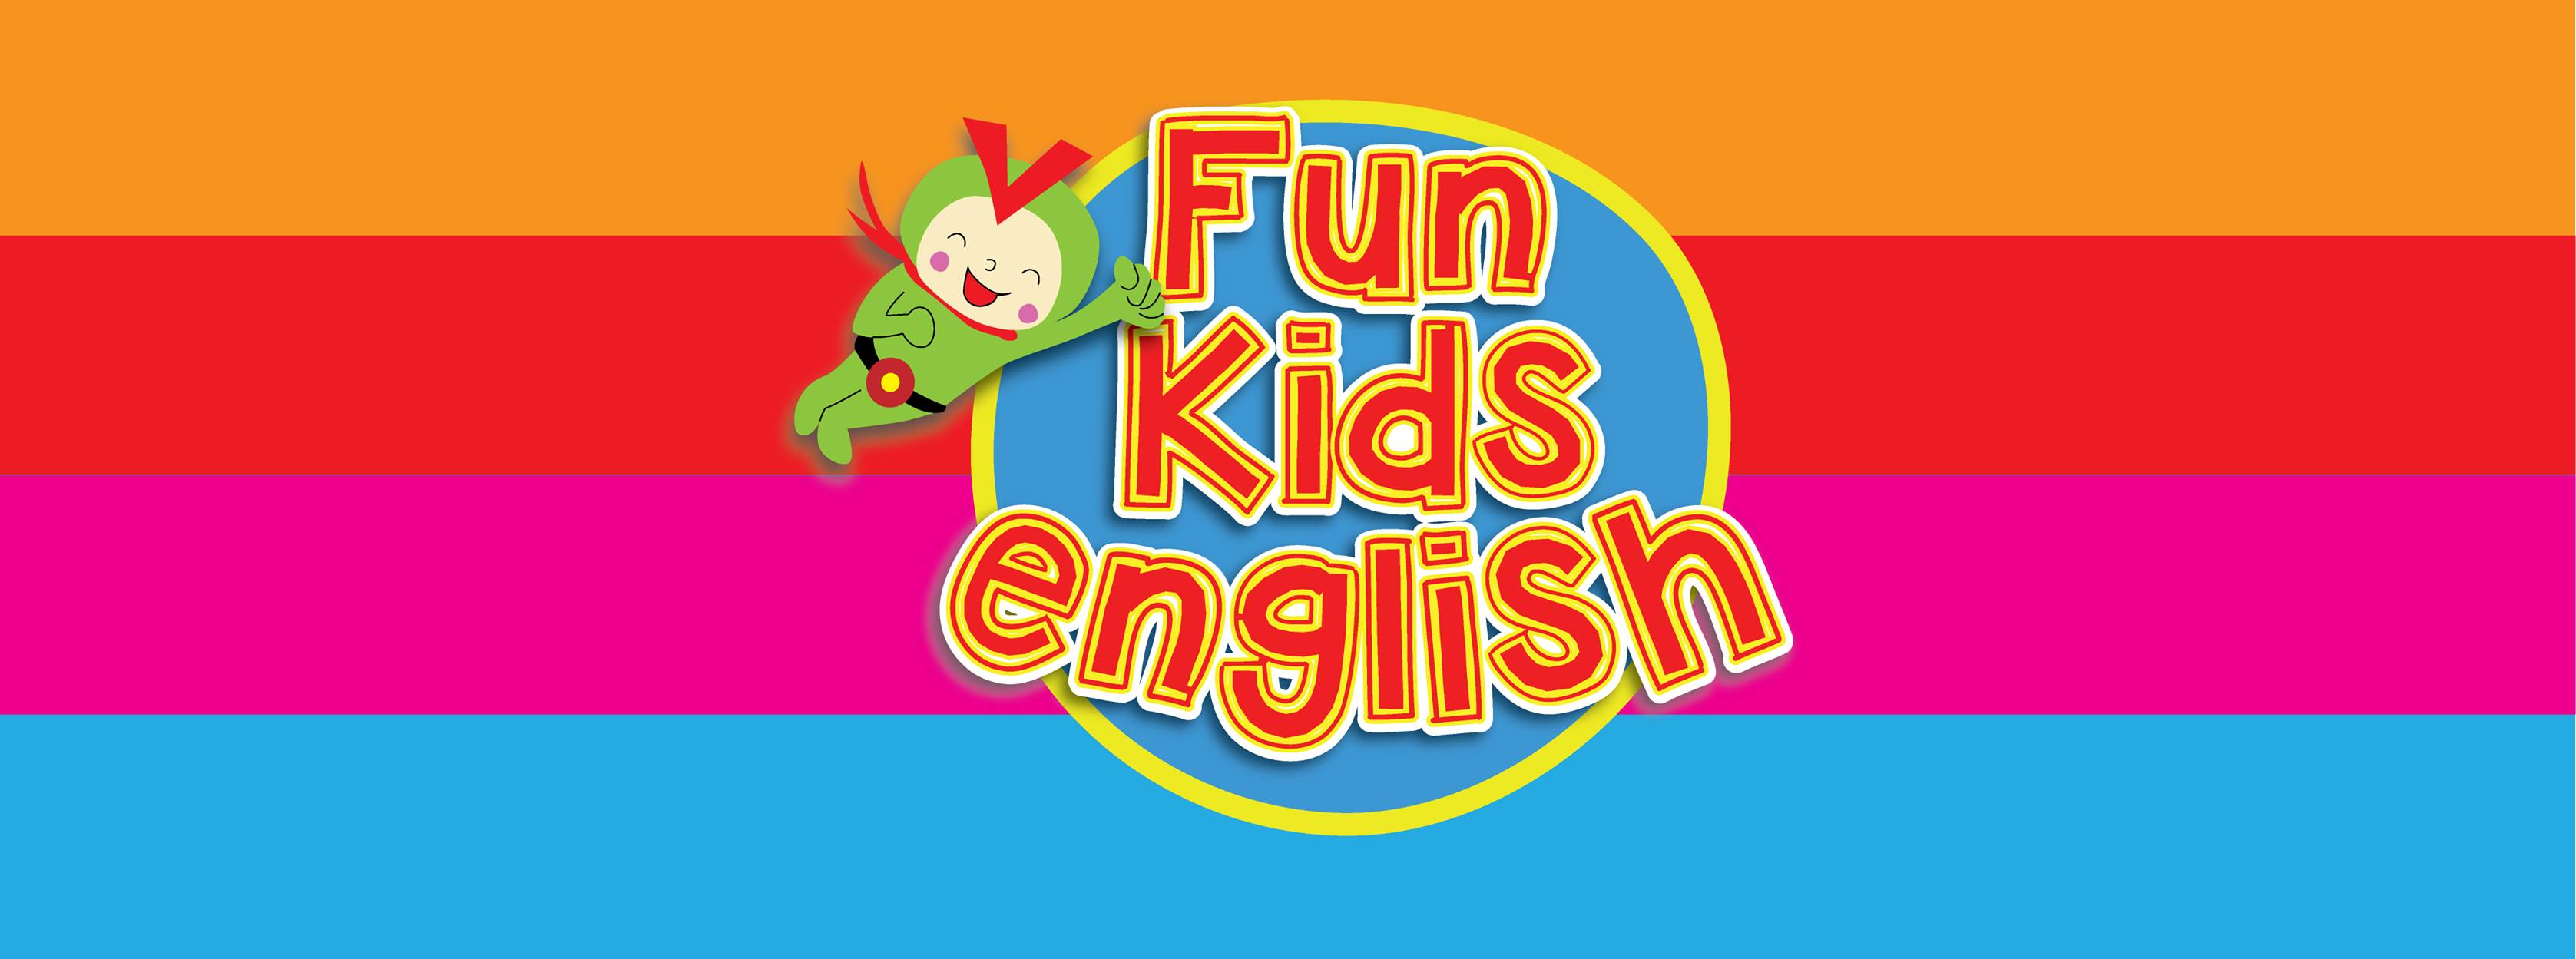 Learning English should be fun, exciting and stimulating for children!